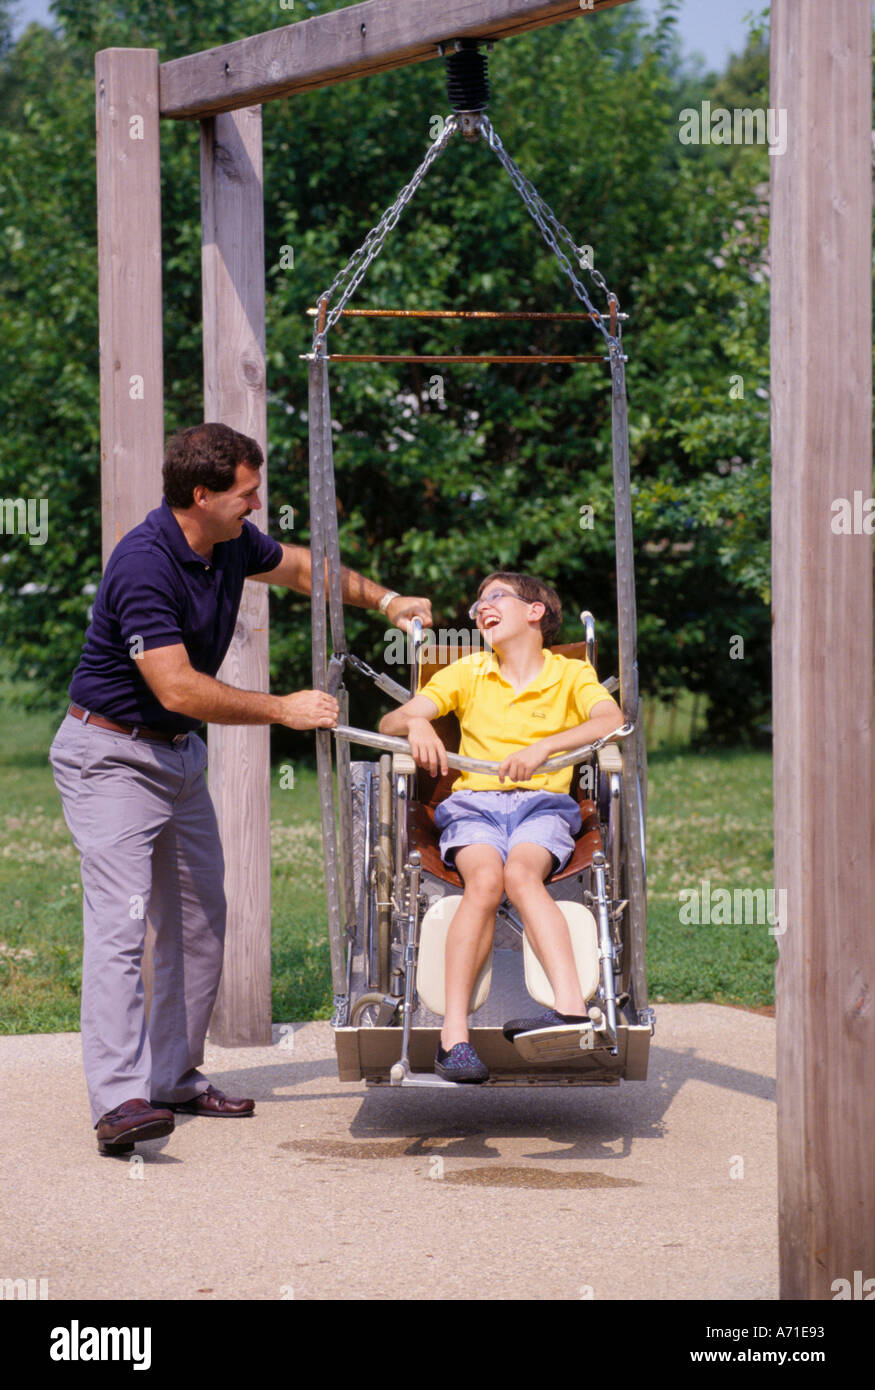 Man Helping A Handicapped Boy On A Wheelchair In A Handicapped